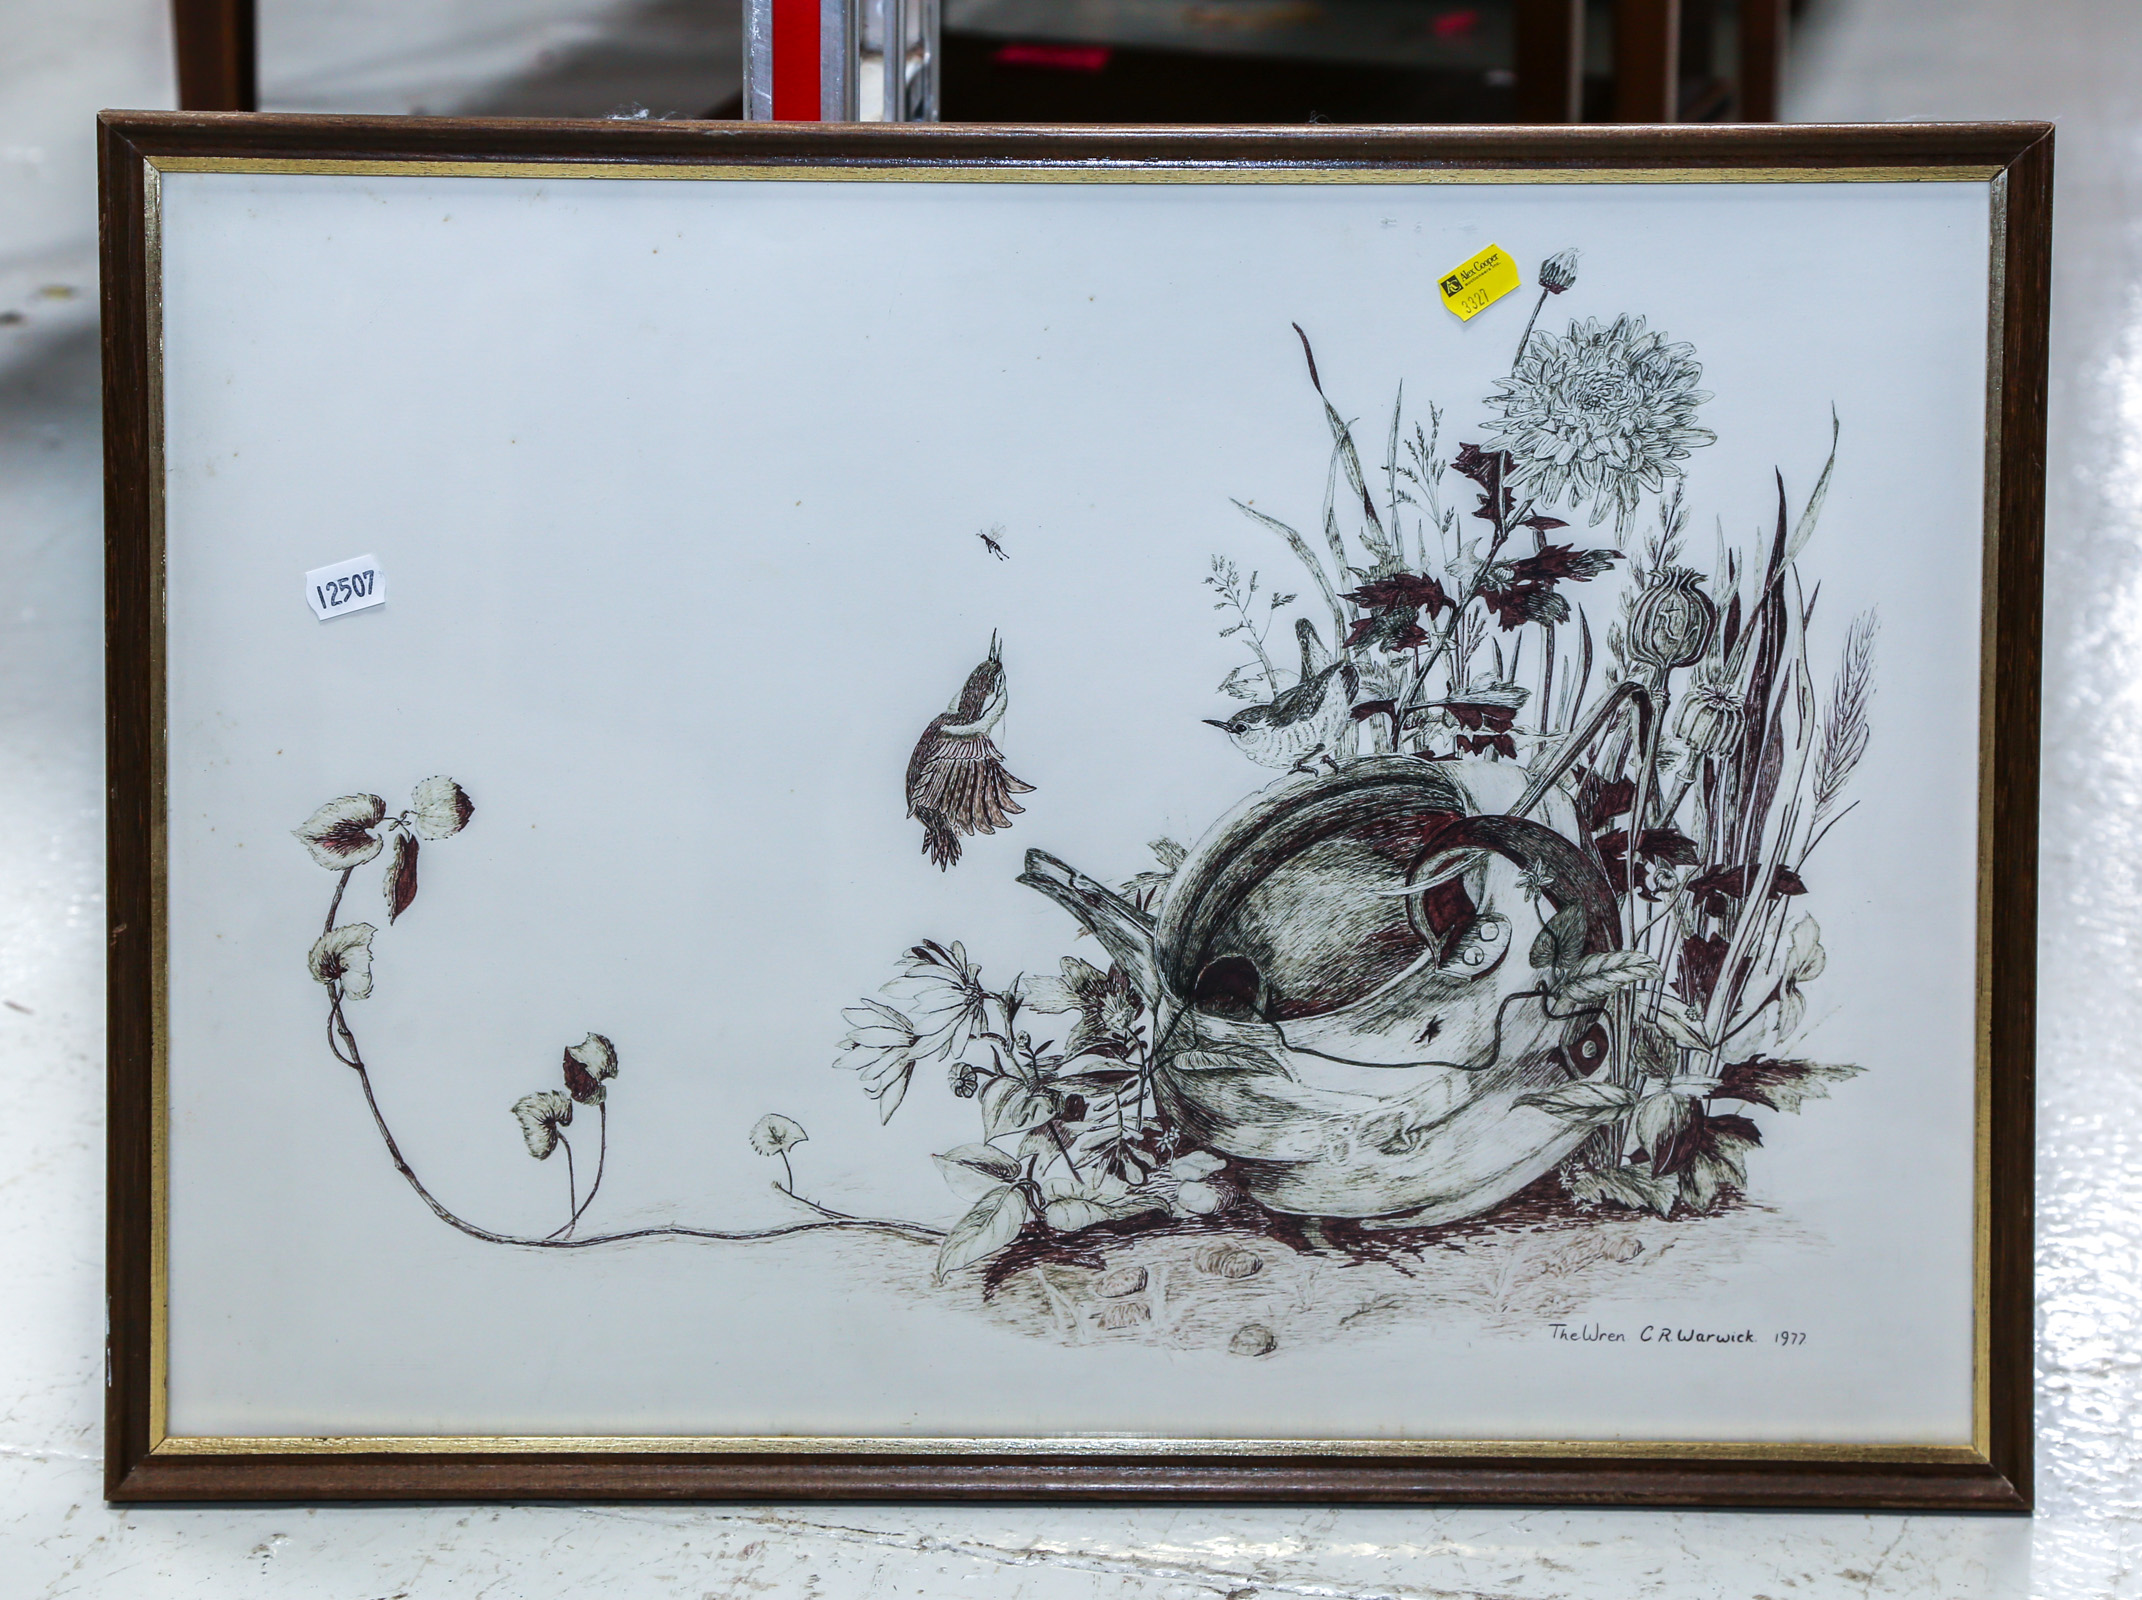 FRAMED LITHOGRAPH OF WREN BY C.R.